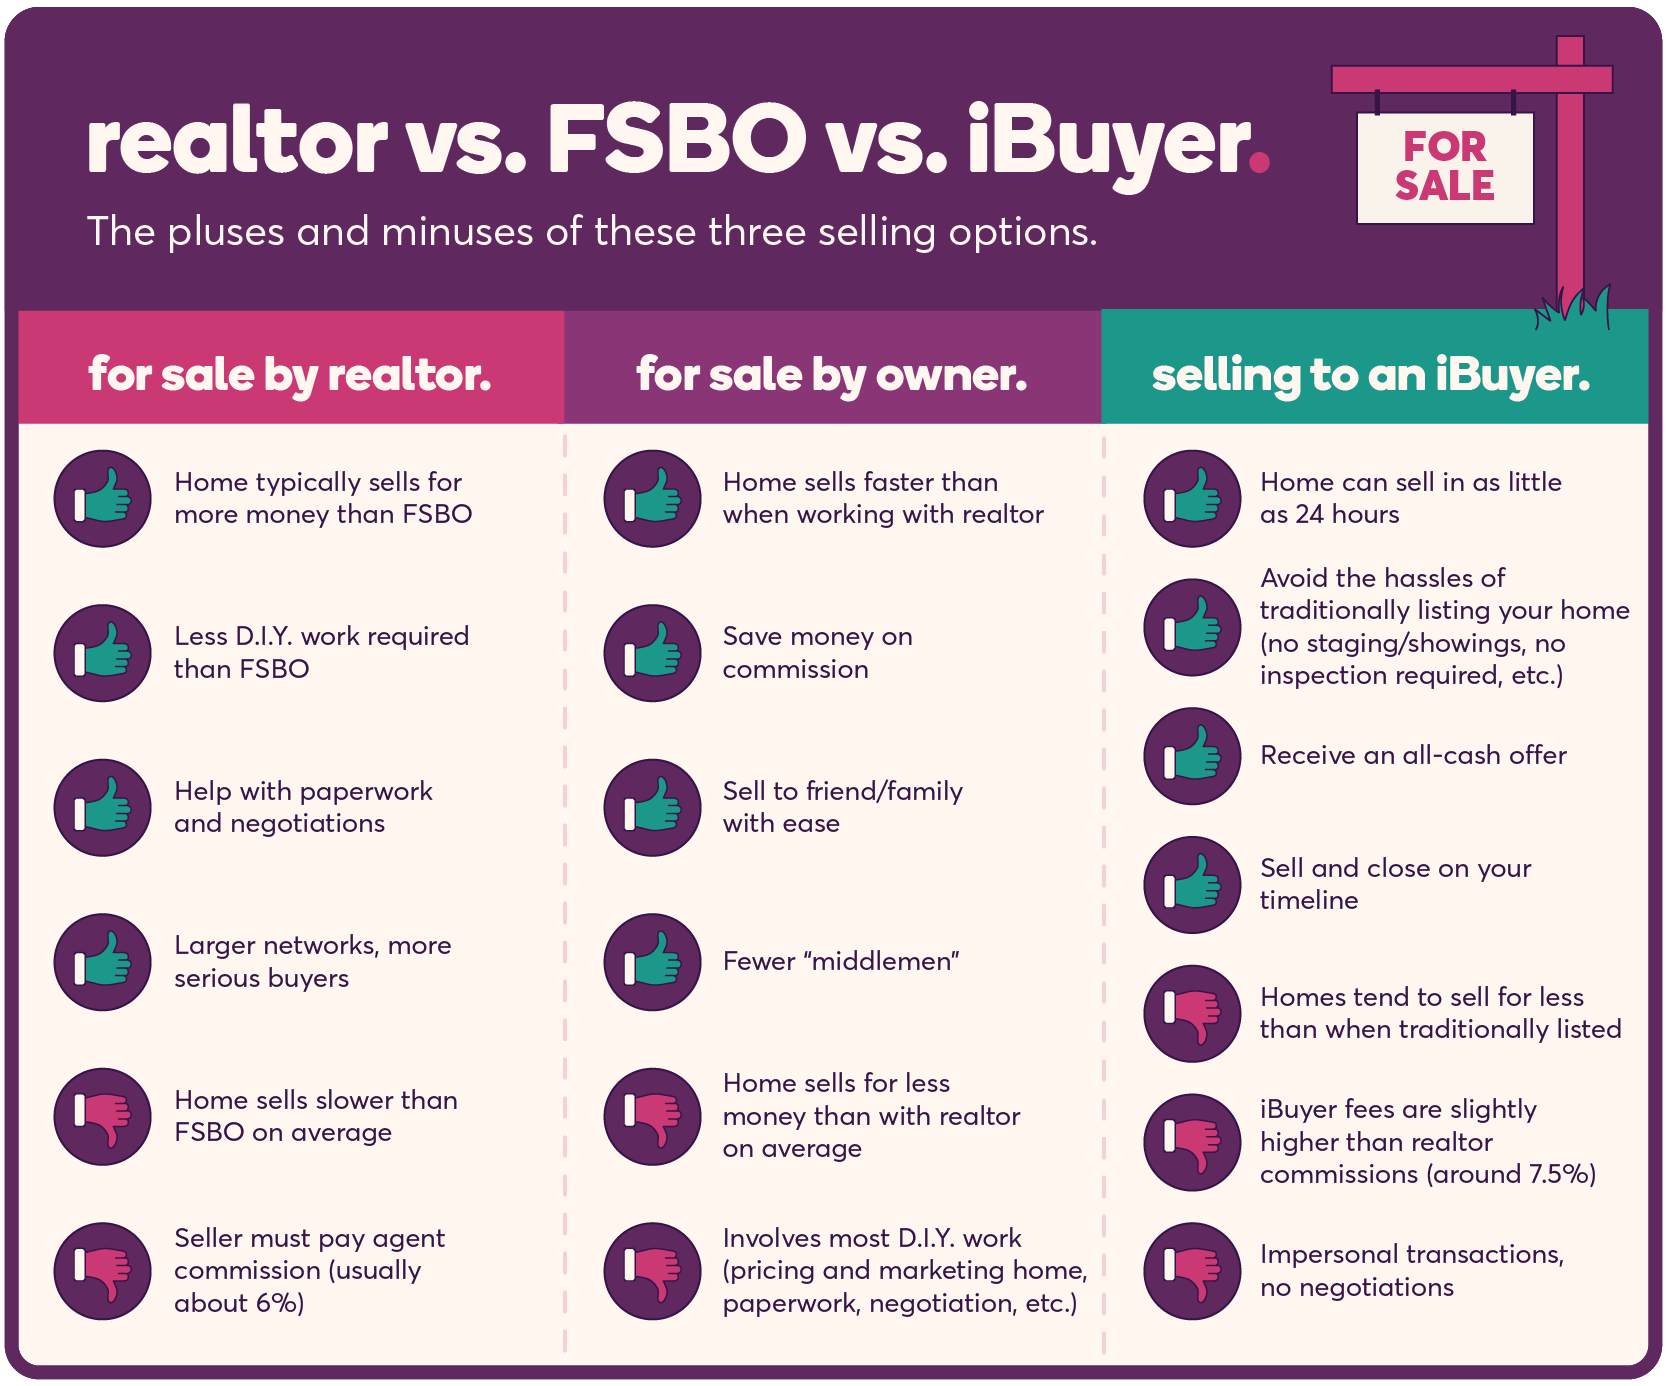 Realtor versus for sale by owner versus iBuyer. The pluses and minuses of these three selling options. When opting to sell with a realtor, the advantages are that a home typically sells for more money than for sale by owner. Less D.I.Y work is required, you have help with paperwork and negotiations and you have access to a larger network and more serious buyers. The disadvantages are that homes sold with realtors on average sell slower than for sale by owners and sellers must pay the agents commission, usually about six percent. When opting to go the for sale by owner route, the advantages are that a home sells faster than working with a realtor, you save money on commission, you can sell to friends or family with ease and there are fewer middlemen. The disadvantages are that for sale by owner homes on average sell for less money than with a realtor and it involves a lot of D.I.Y work, such as pricing and marketing the home, doing paperwork, negotiations, etcetera. When opting to sell to an iBuyer, the advantages are that a home can sell in as little as 24 hours, you avoid the hassles of traditionally listing your home (like staging, showings, inspections, etcetera), you receive an all-cash offer, and you can sell and close on your own timeline. The disadvantages are that homes tend to sell for less than when traditionally listed, iBuyer fees are slightly higher than realtor commissions (around 7.5 percent), and the transactions are impersonal, so there’s no negotiations. 